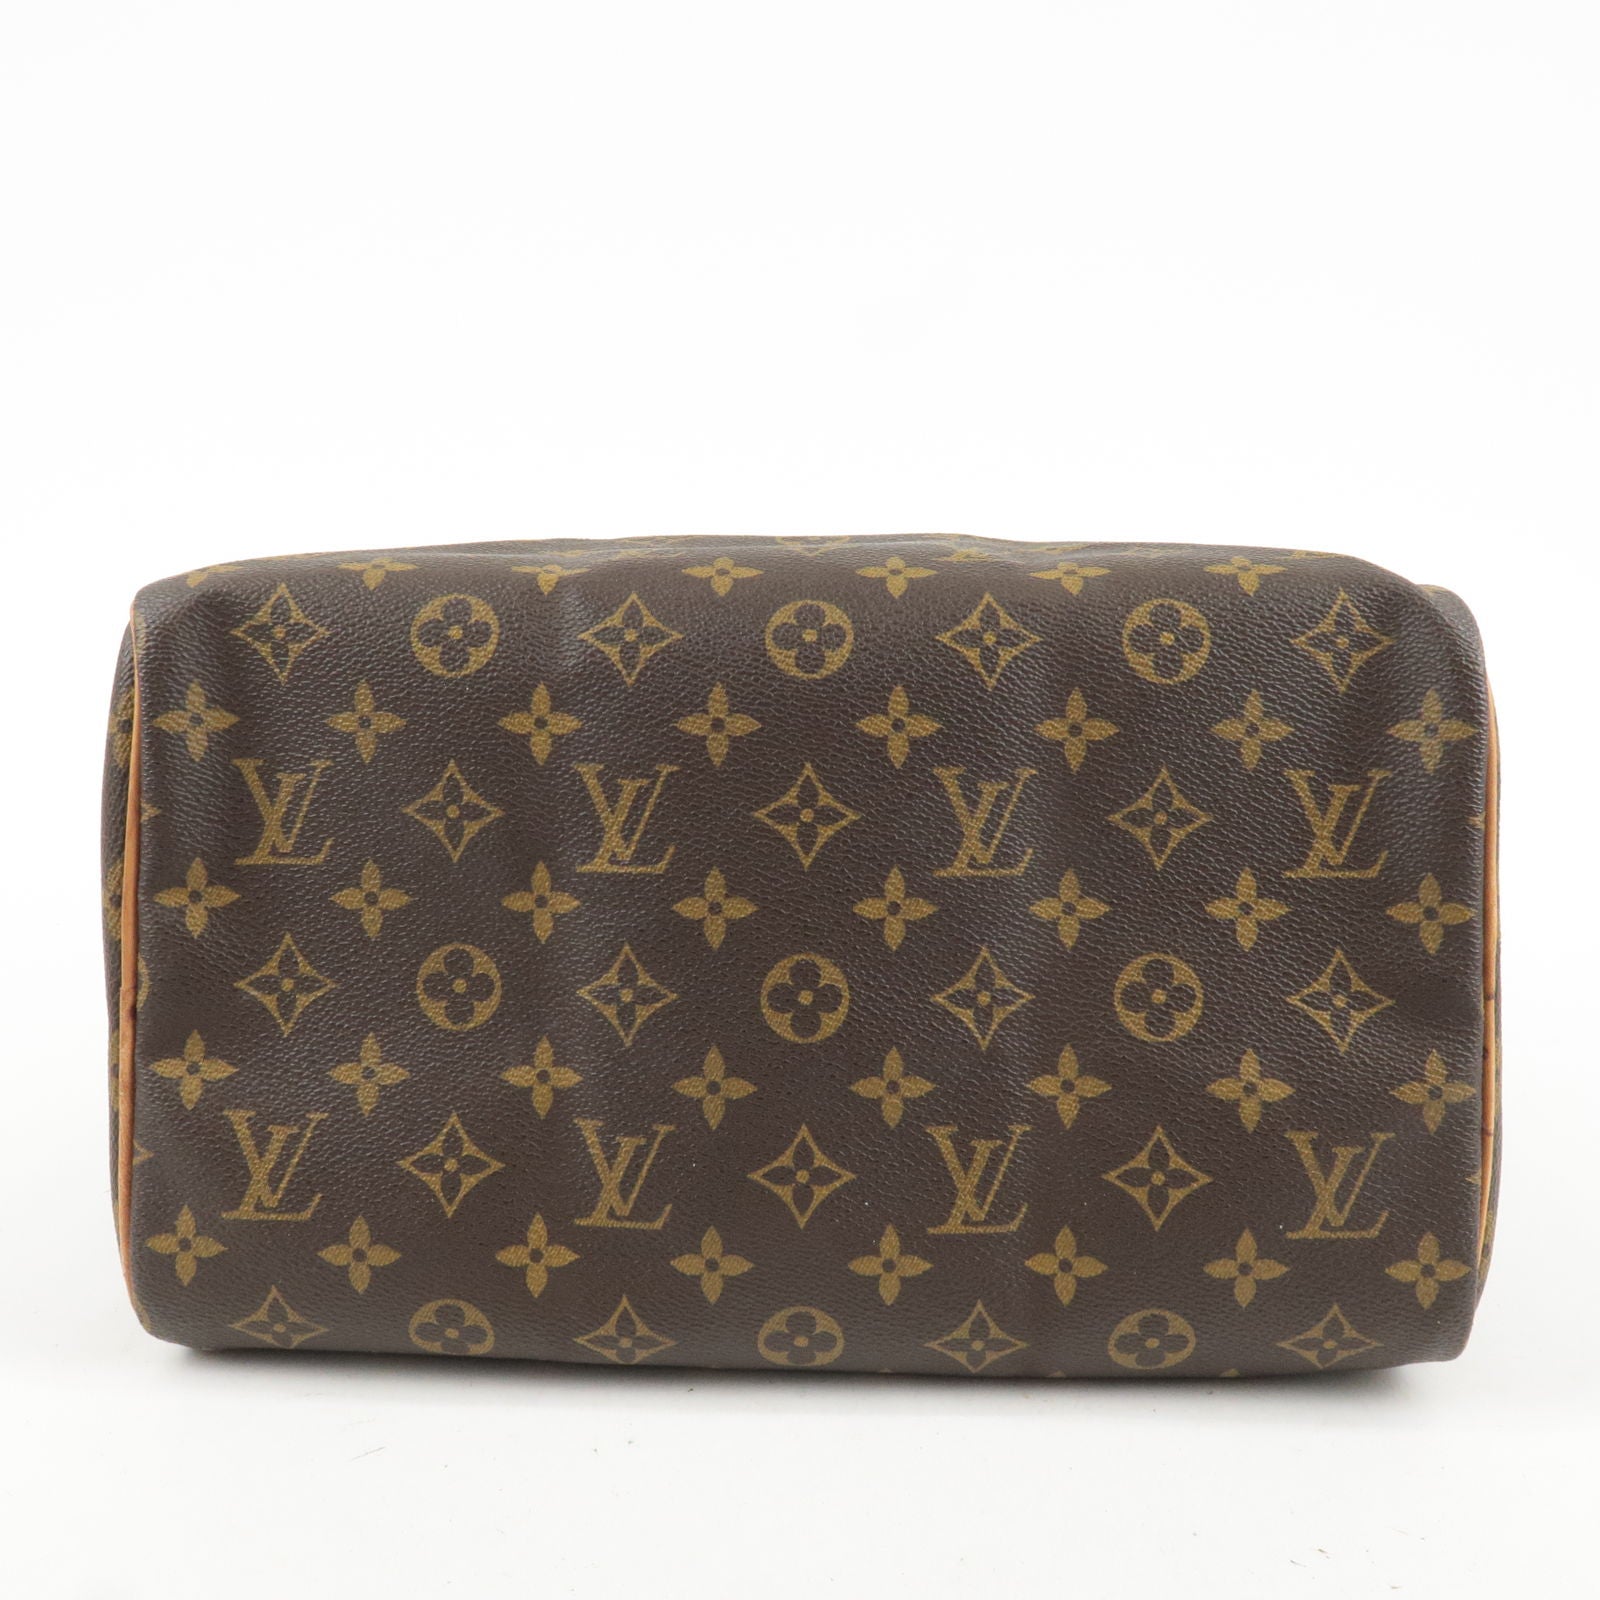 LV bag( scarf & coin pouch included)